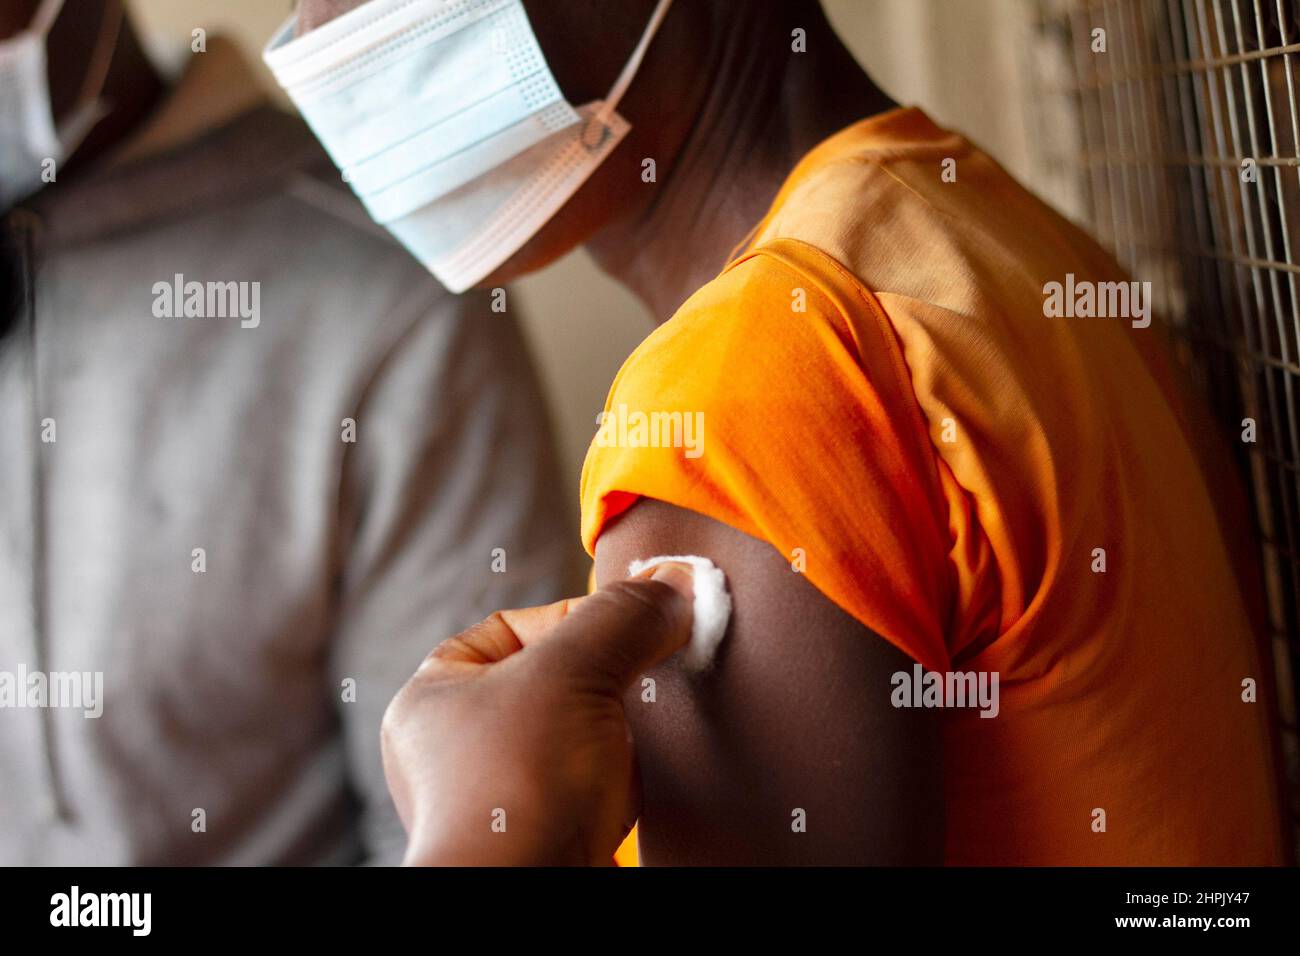 A health worker prepares a patient's arm, cleaning with cotton wool dipped in disinfectant to prepare for Covid-19 vaccination. Malawi. Stock Photo